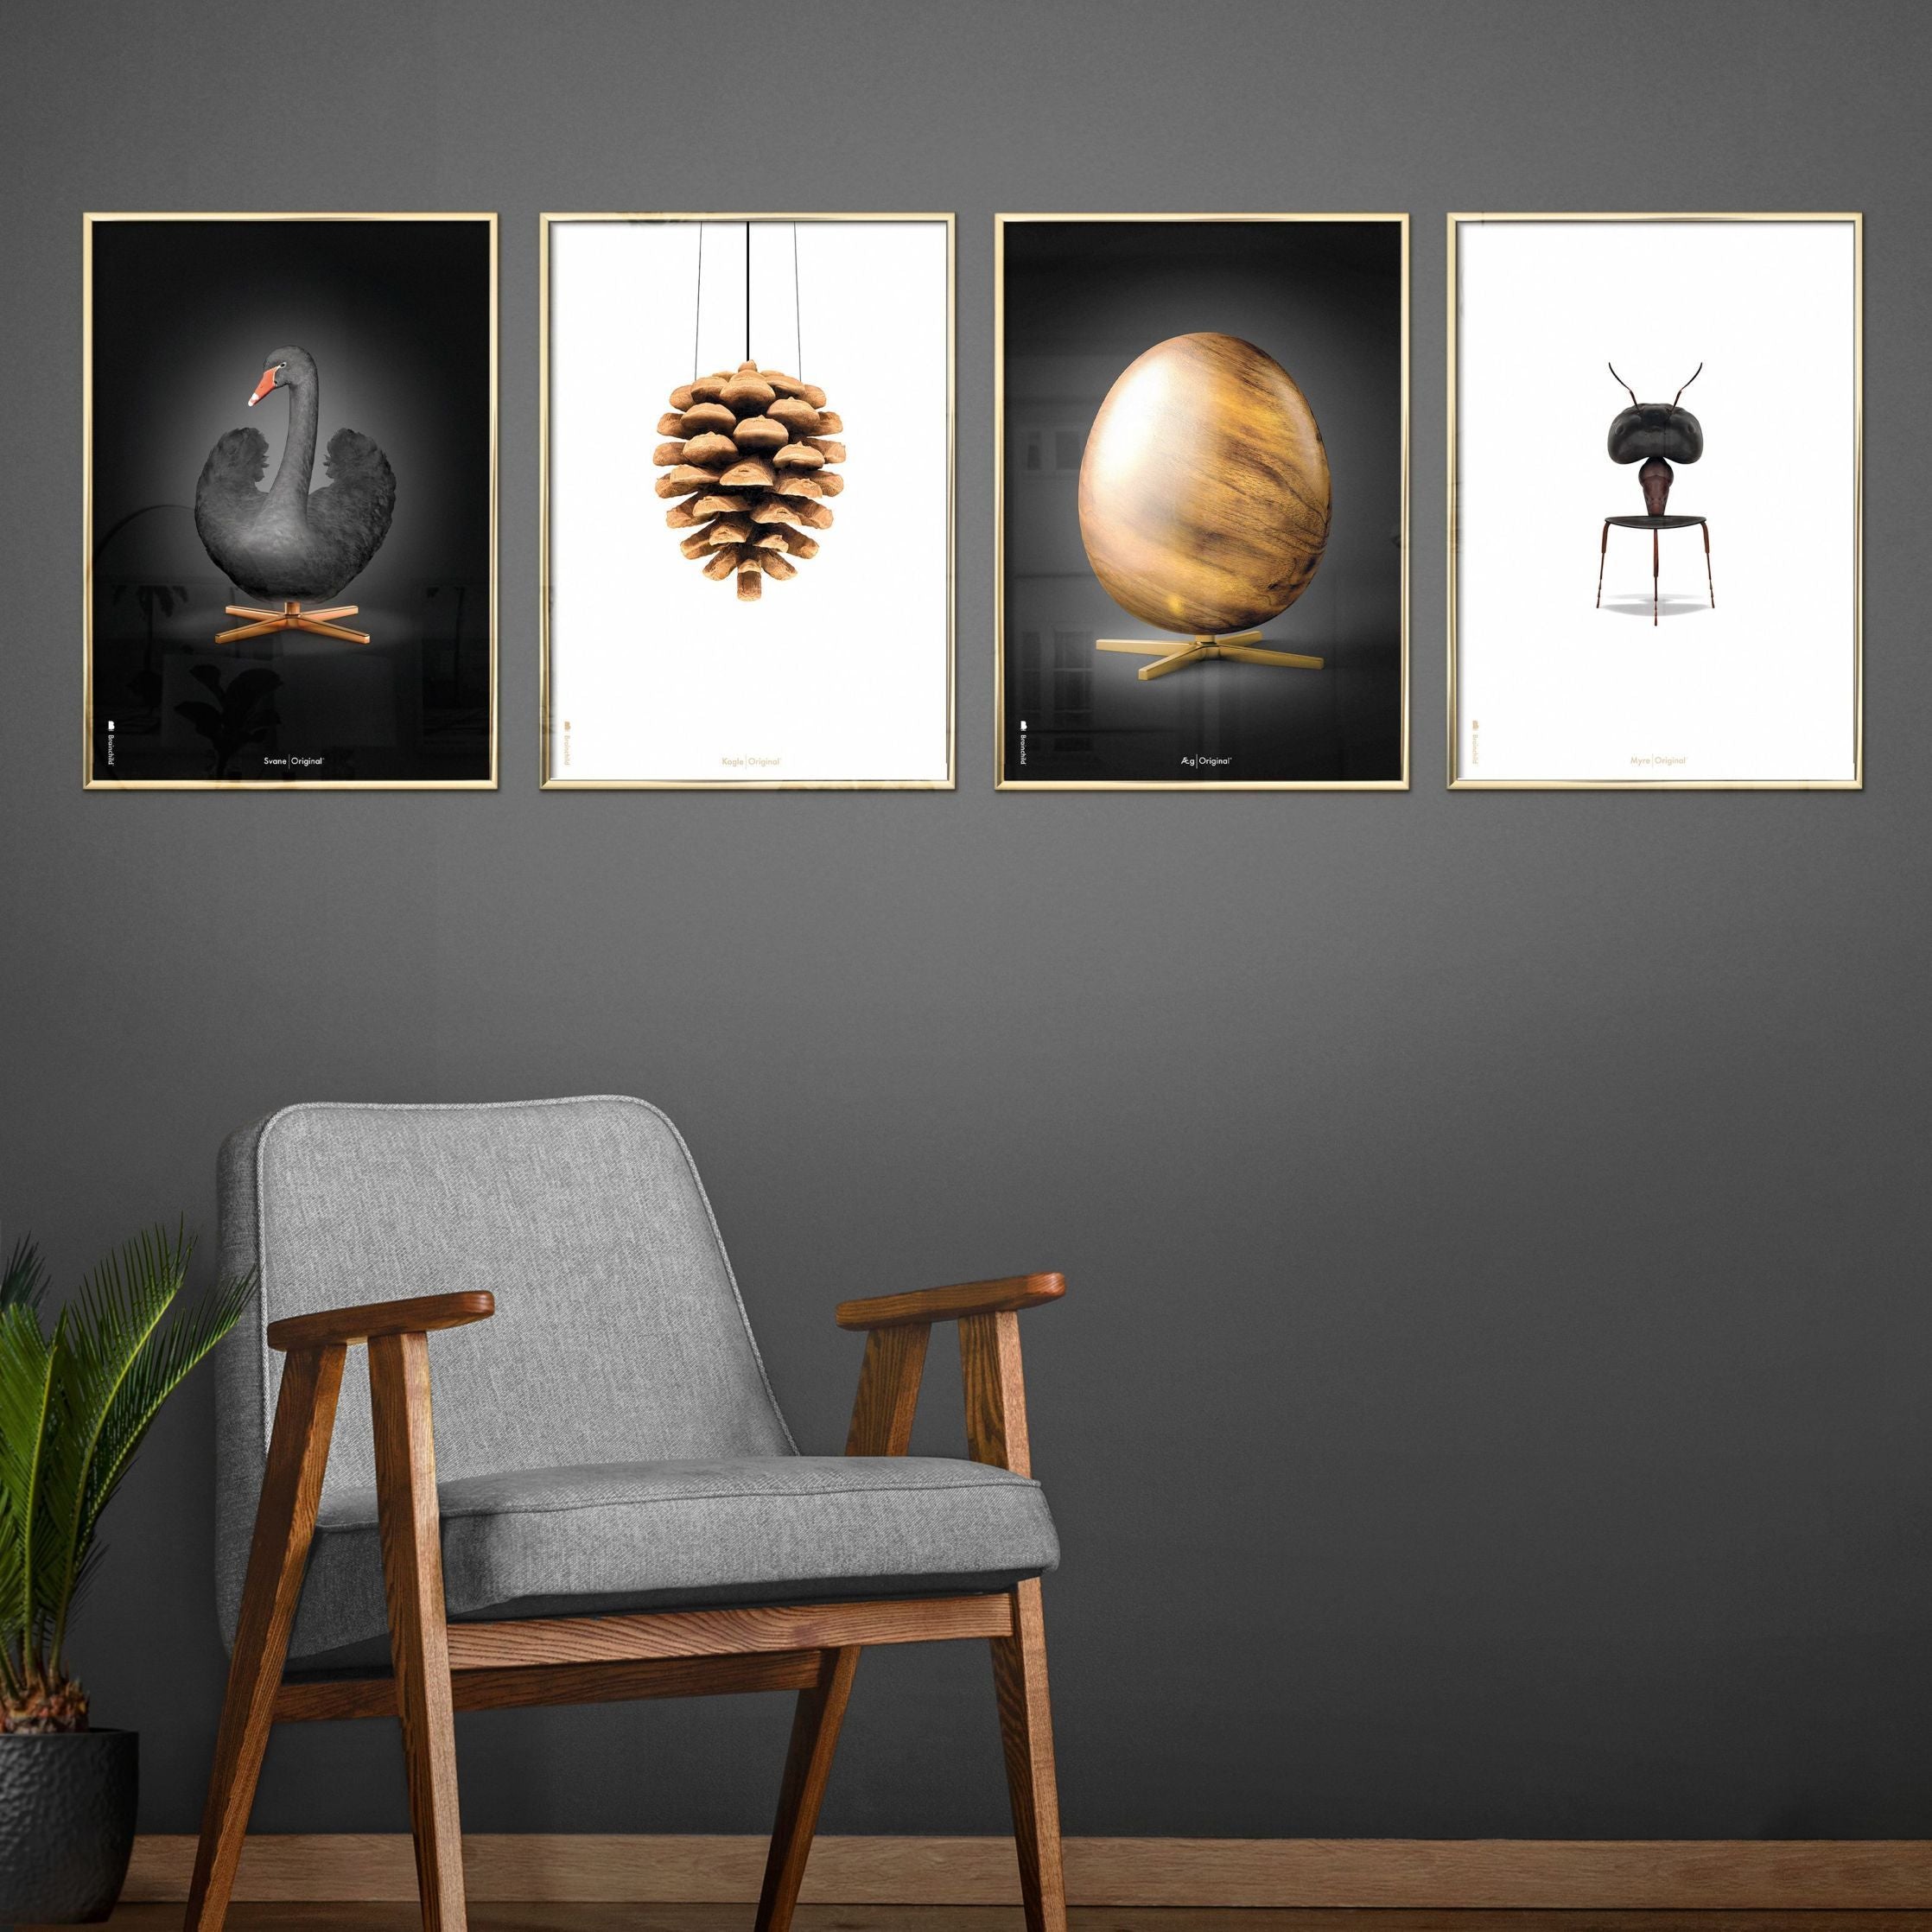 Brainchild Pine Cone Classic Poster, Frame Made Of Light Wood 30x40 Cm, White Background